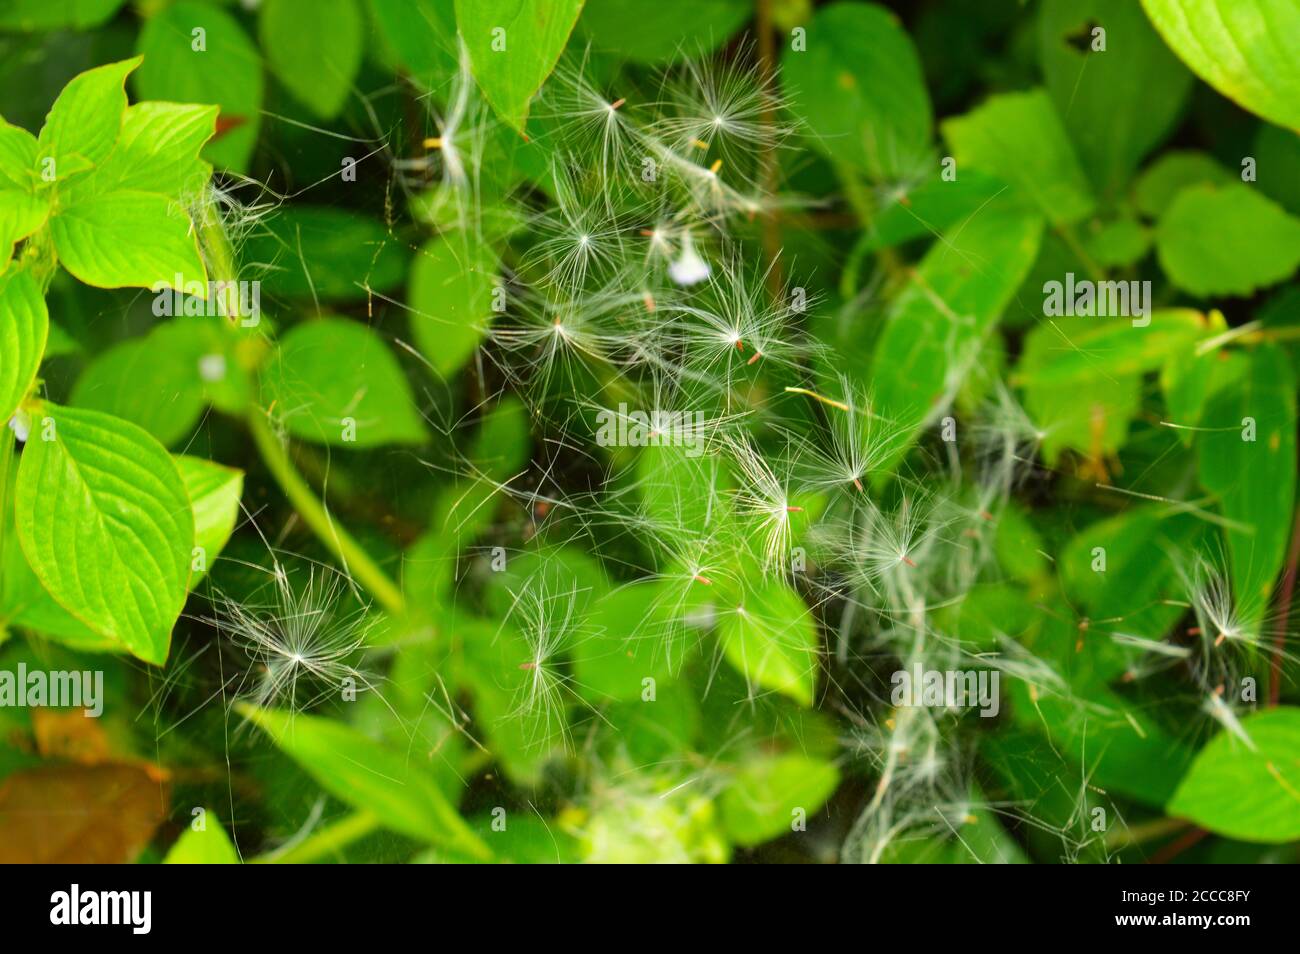 image shows dandelion seeds trapped in a spider web. The seeds will eventually fall down on the ground after a rain or strong wind. Stock Photo